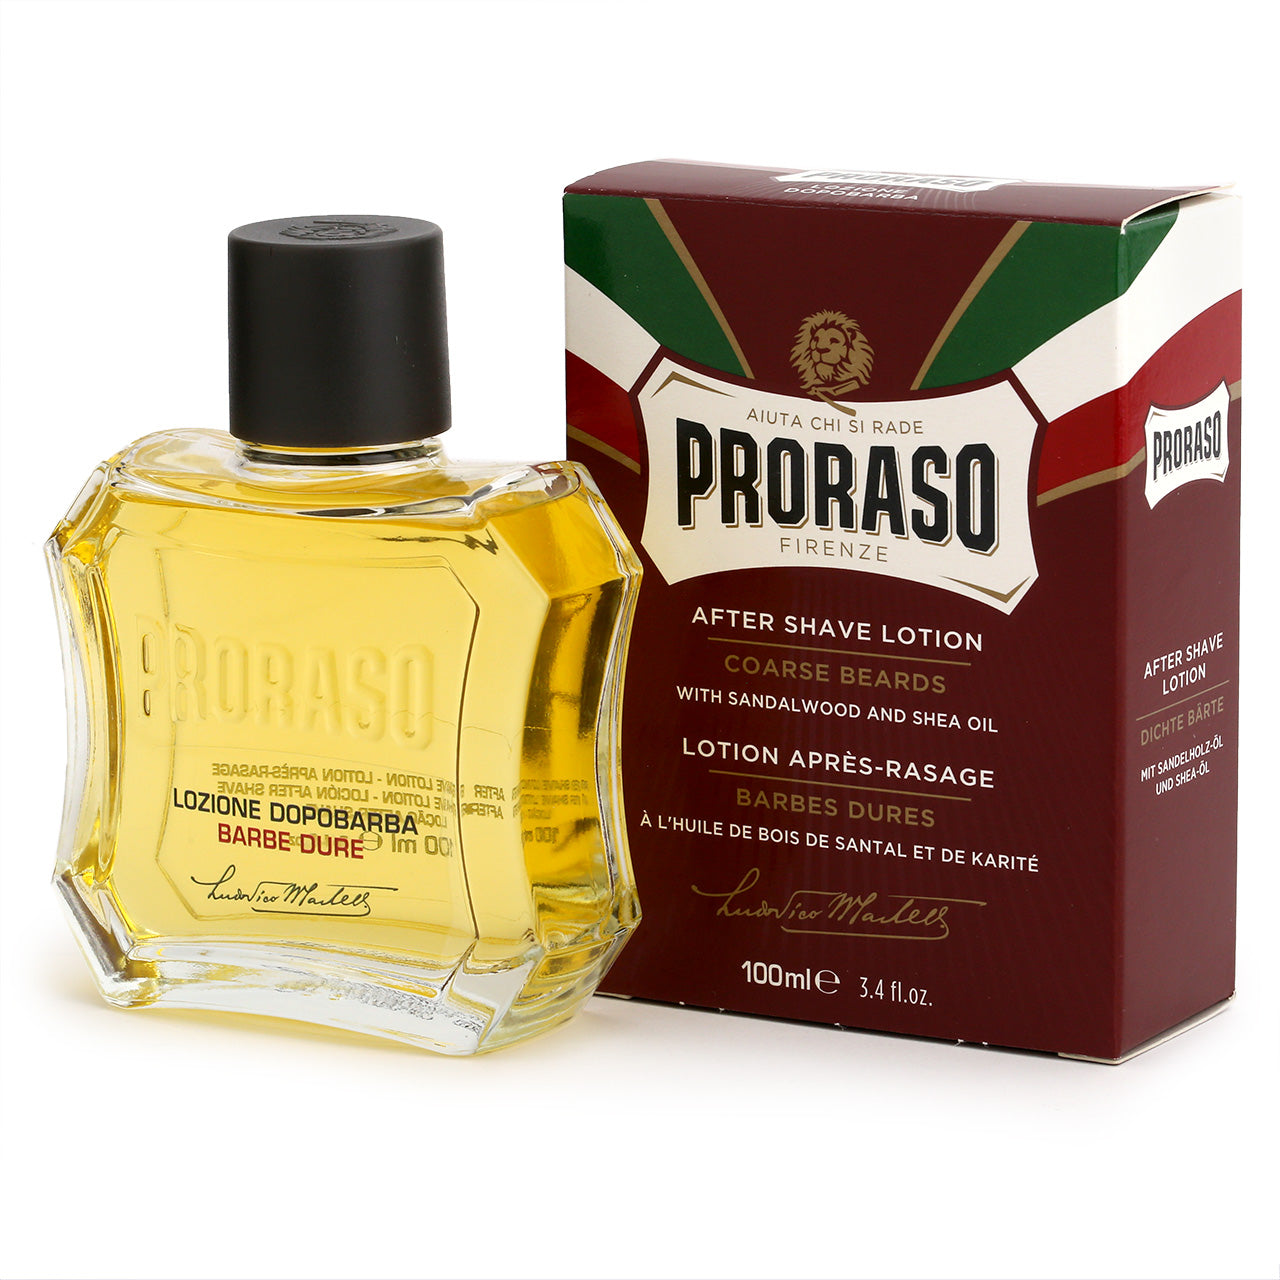 Proraso After Shave Lotion with Sandalwood and Shea Oil - with retro shaped bottle and box